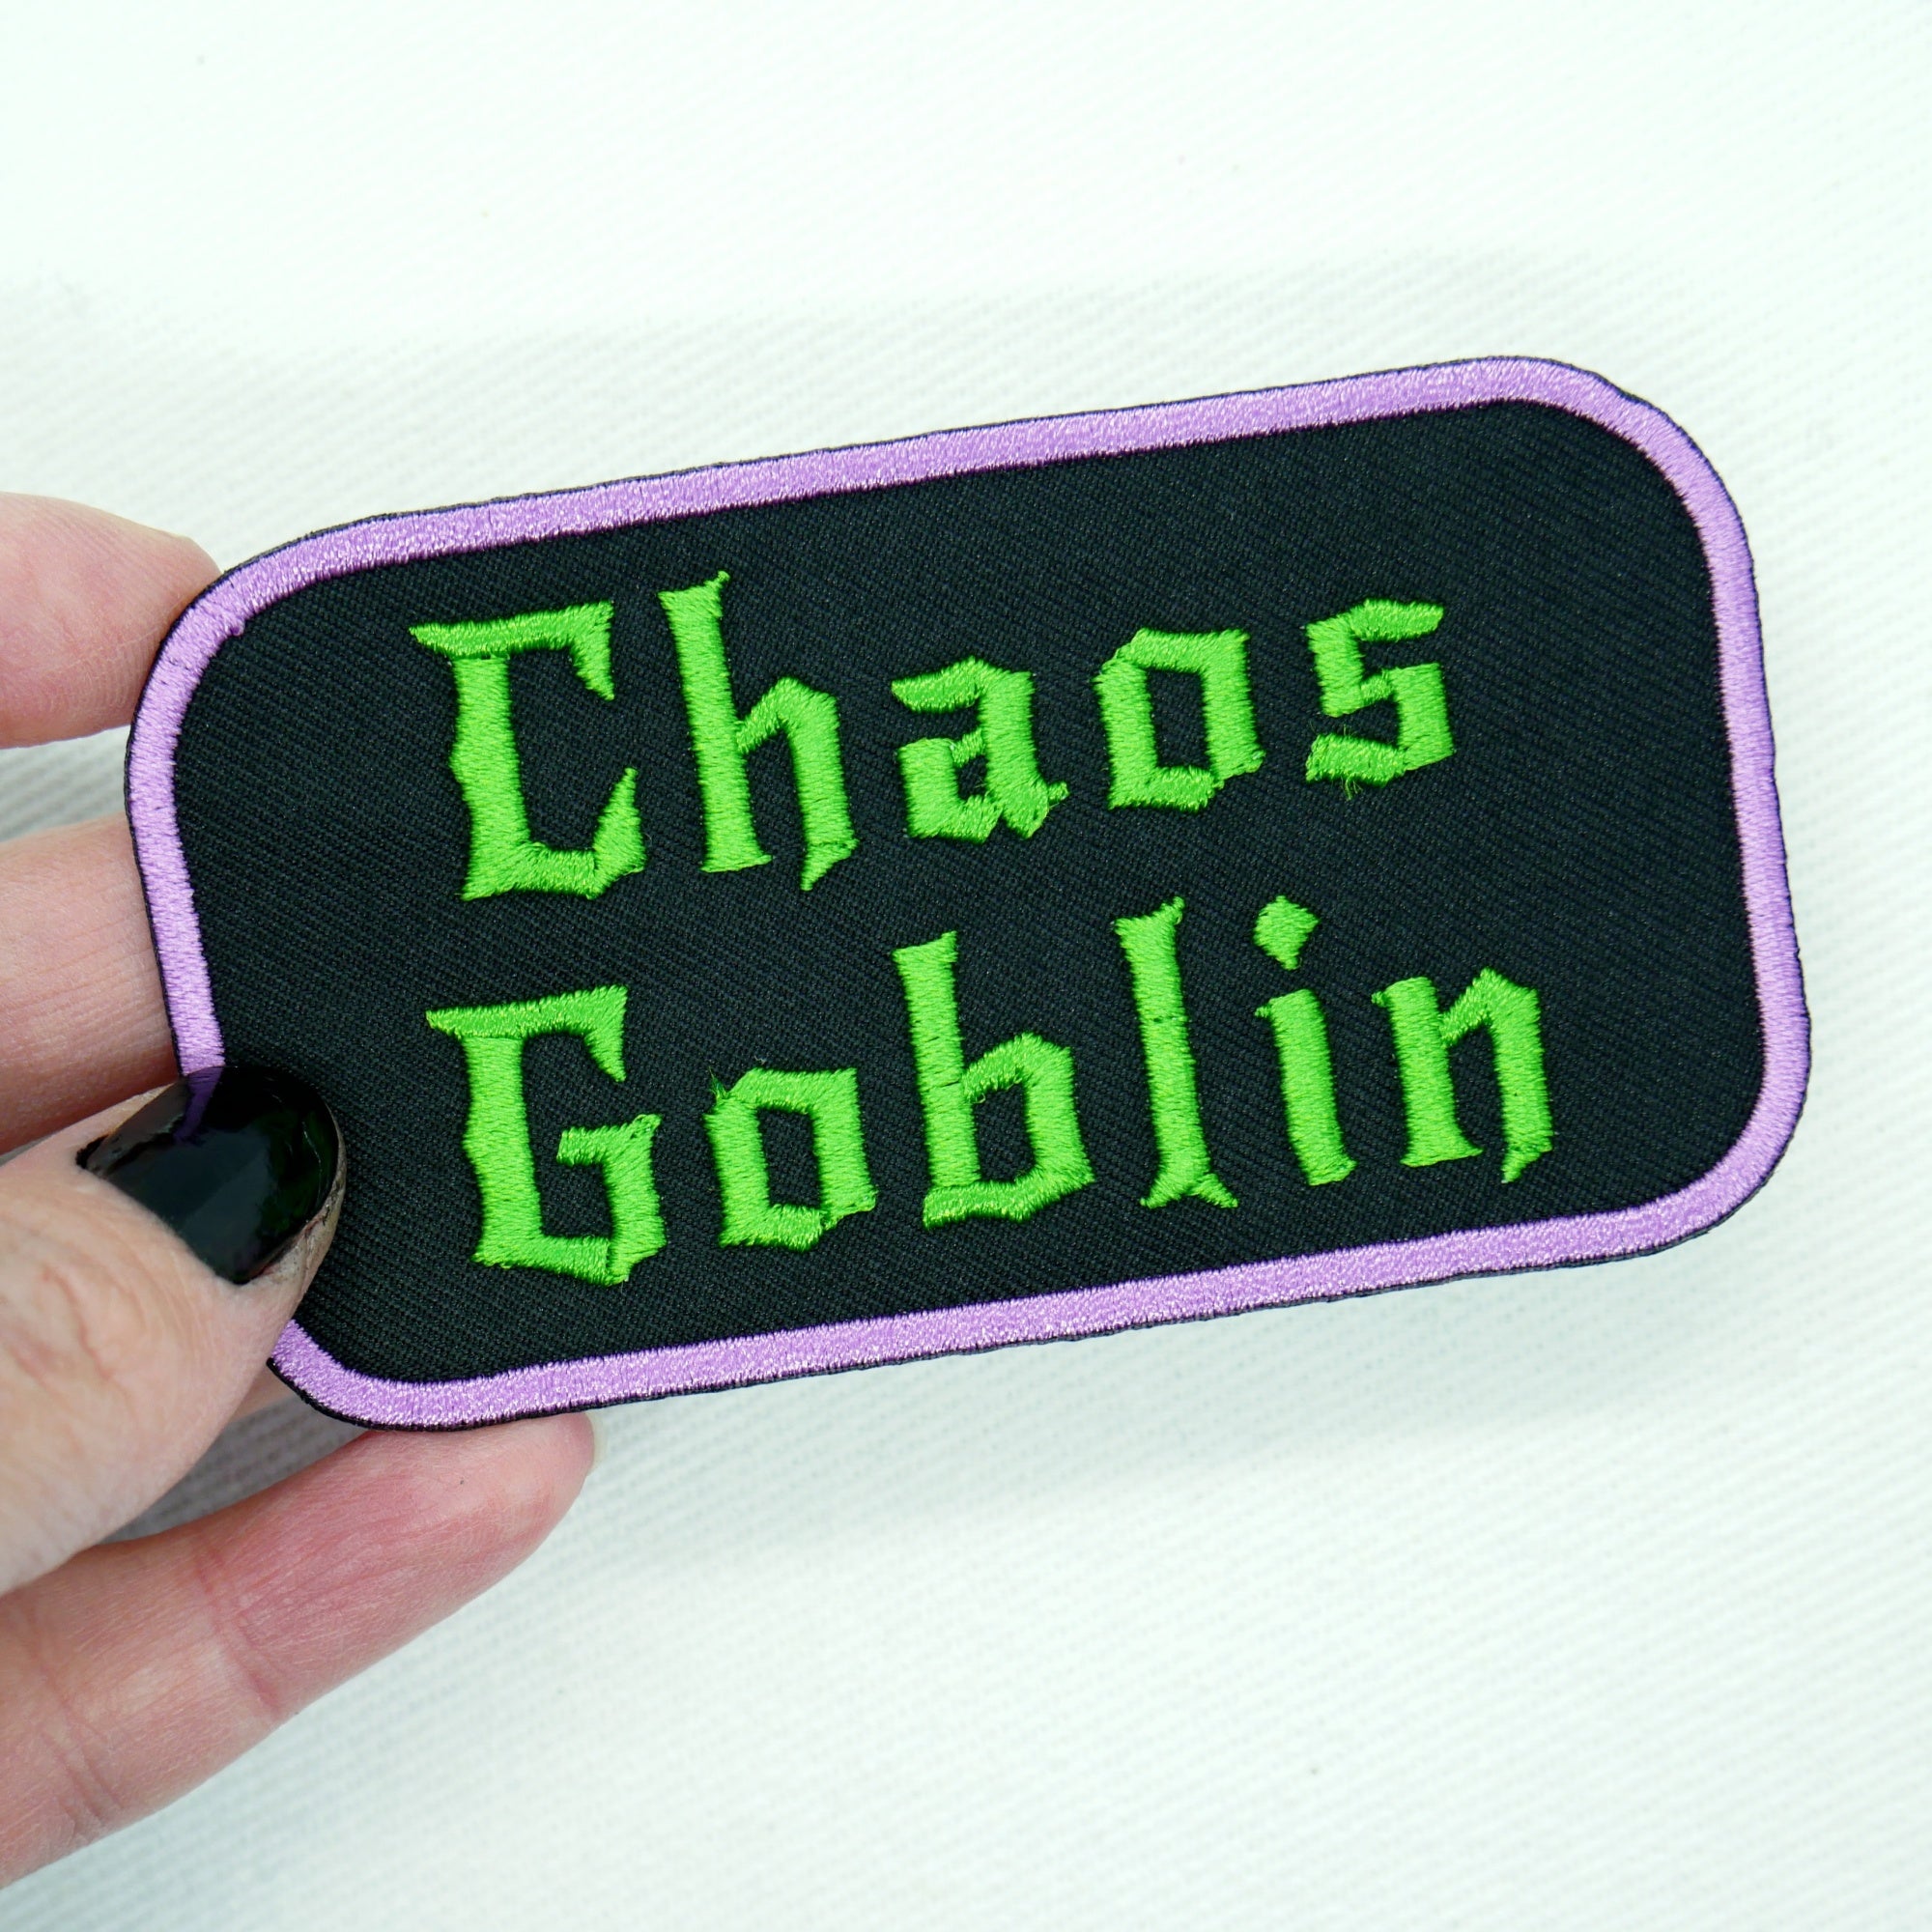 Chaos Goblin Name Tag Patch